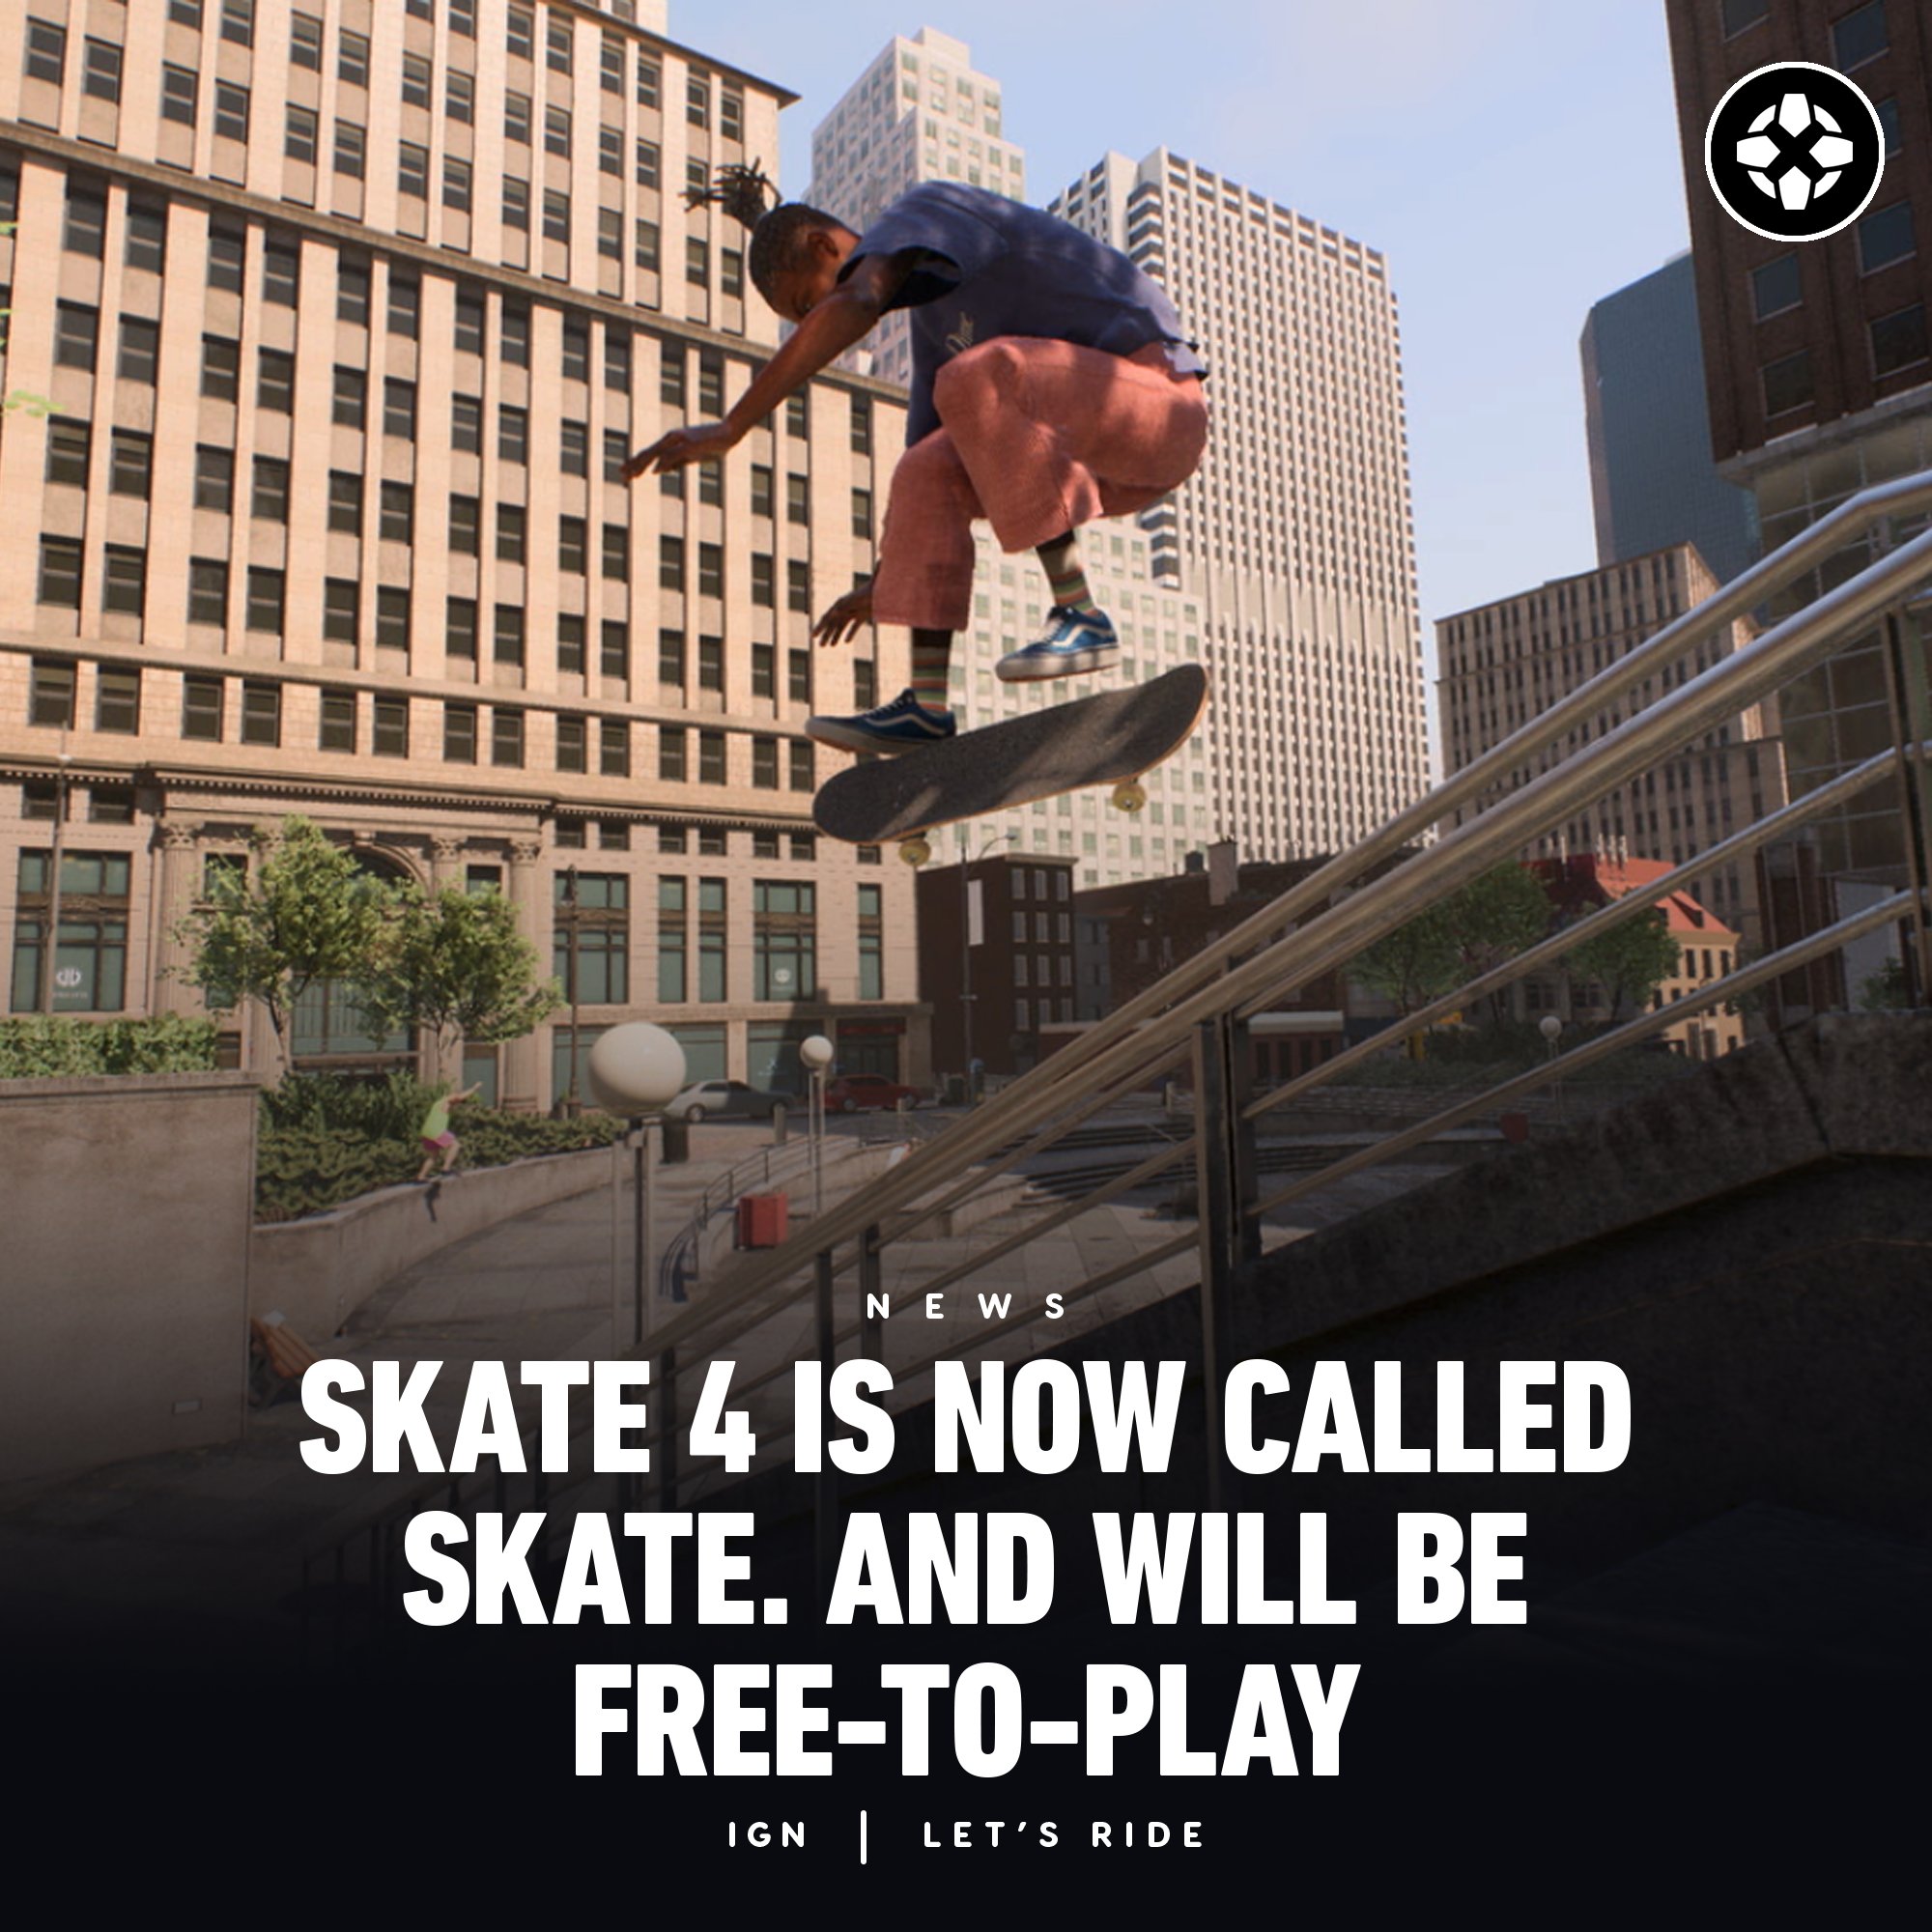 Skate 4 Is Officially Called skate. and It Will Be Free-to-Play